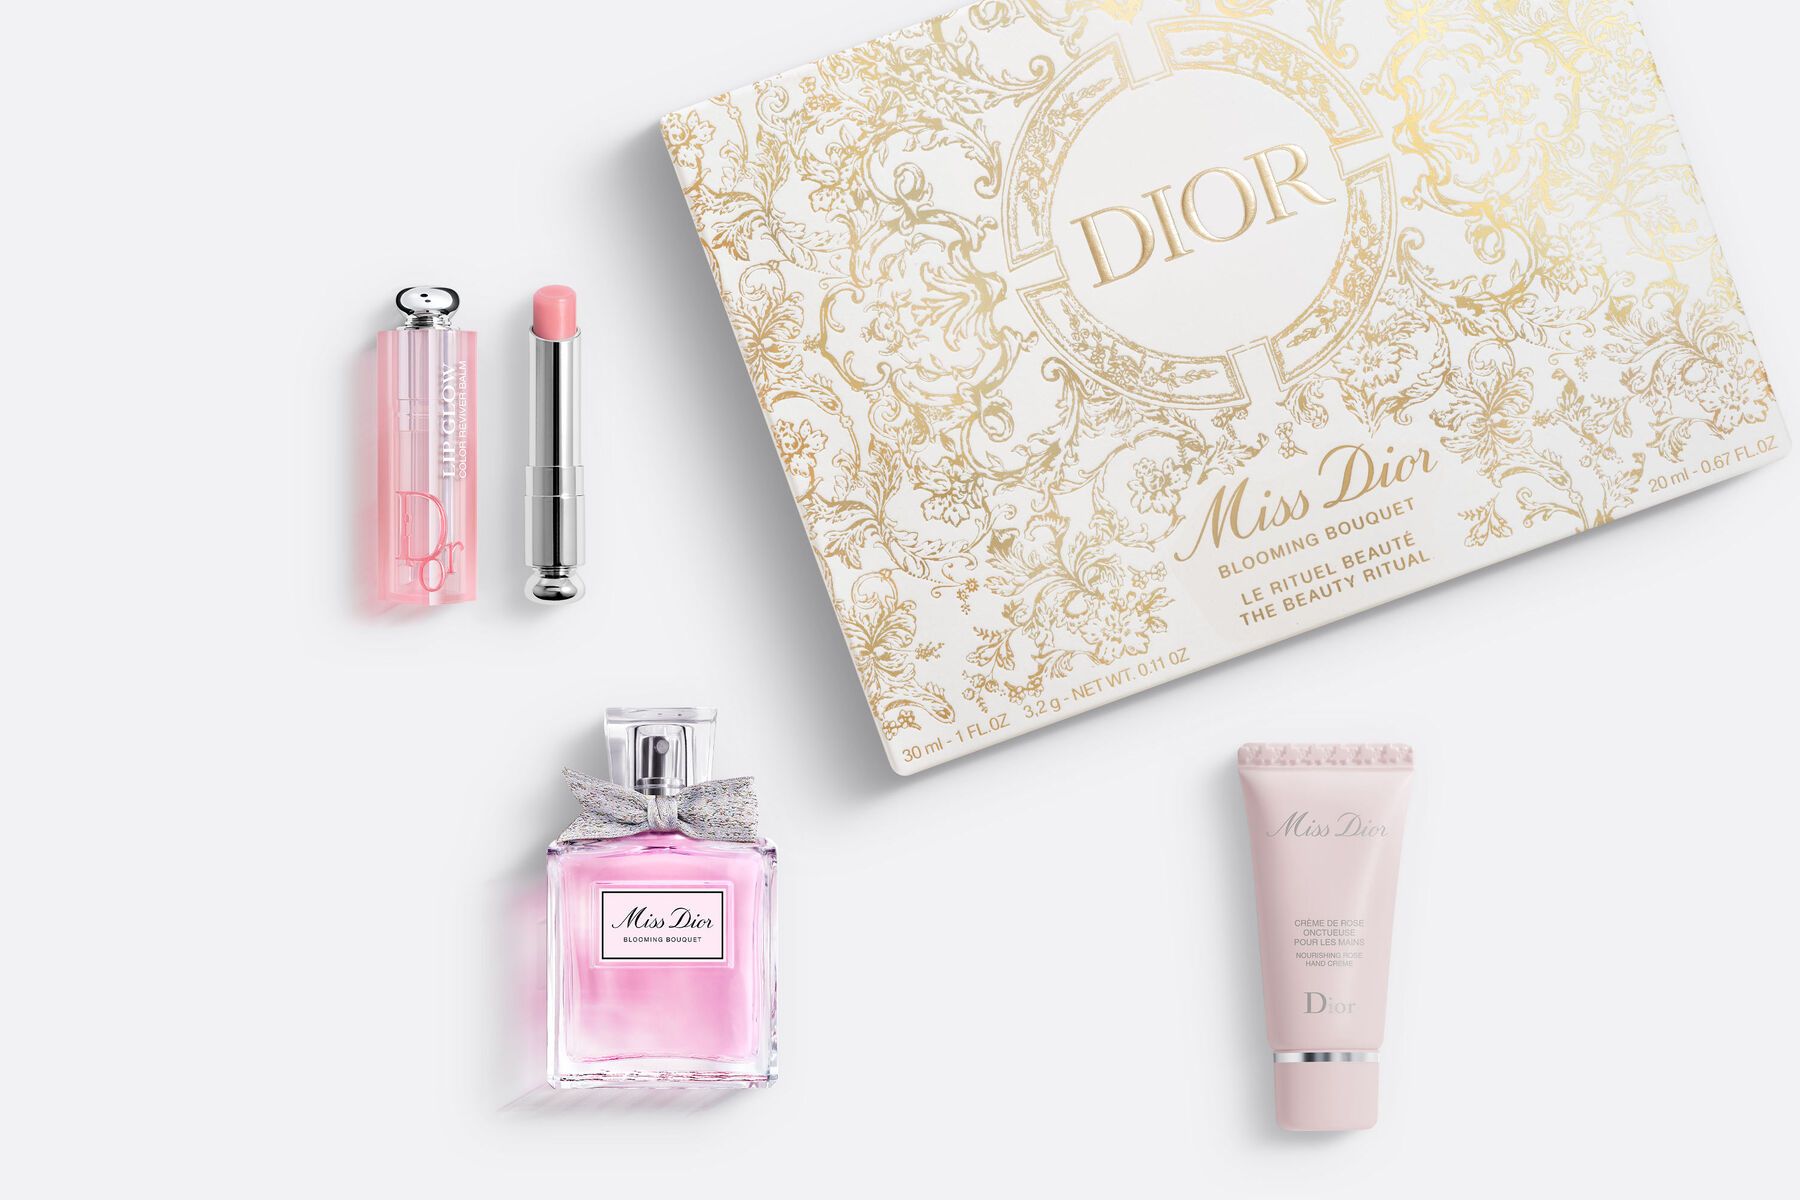 Miss Dior Blooming Bouquet - The beauty ritual - Limited edition | Dior Beauty (US)